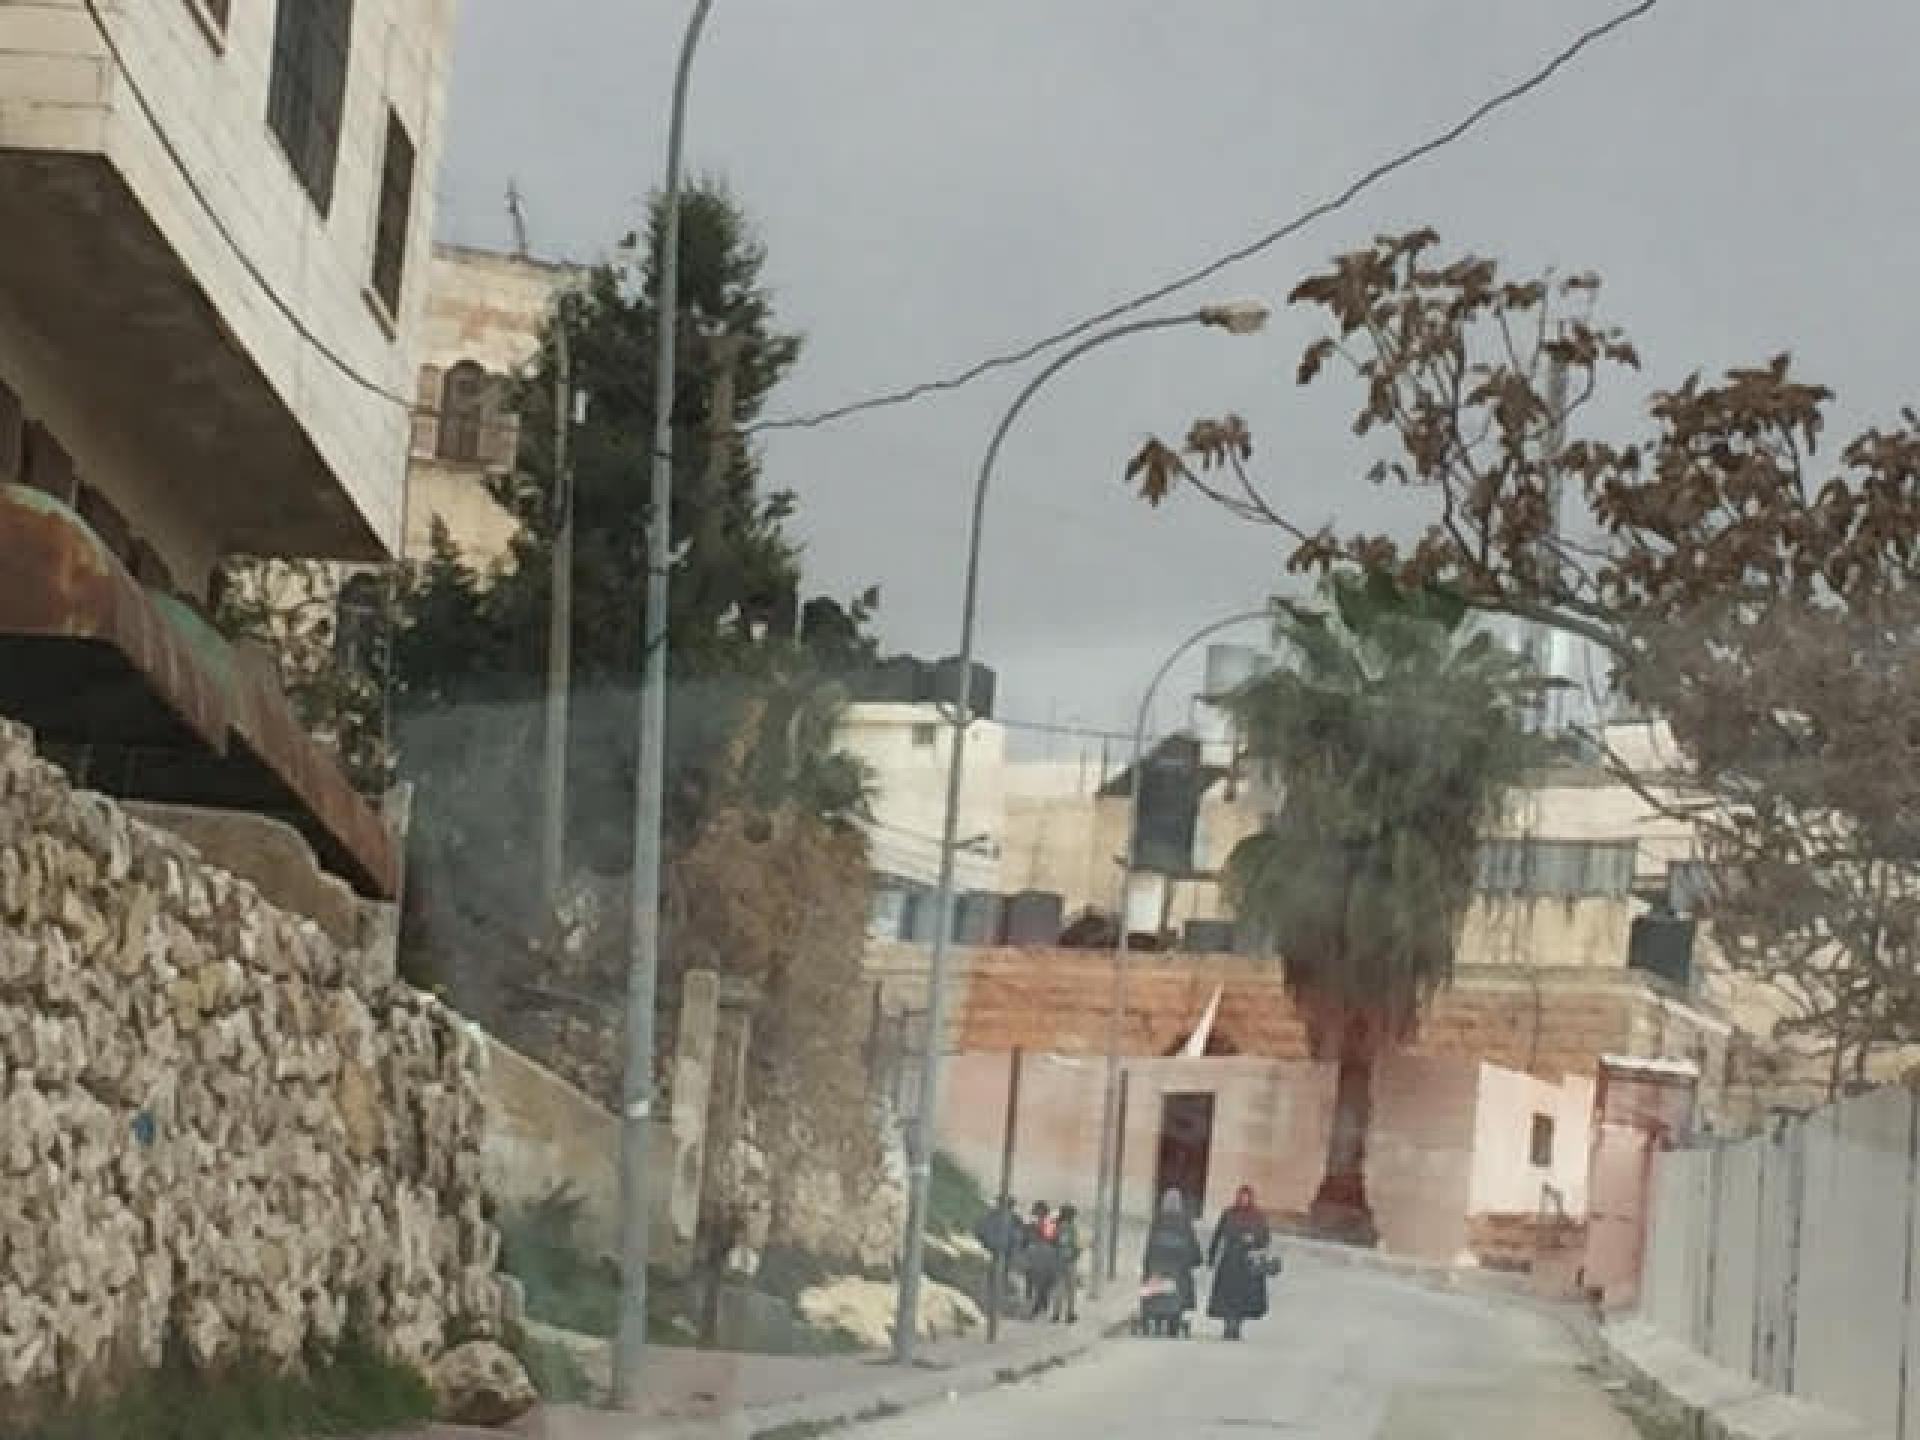 The Kapisha neighborhood. Palestinians are still not allowed in with their cars and therefore go on foot